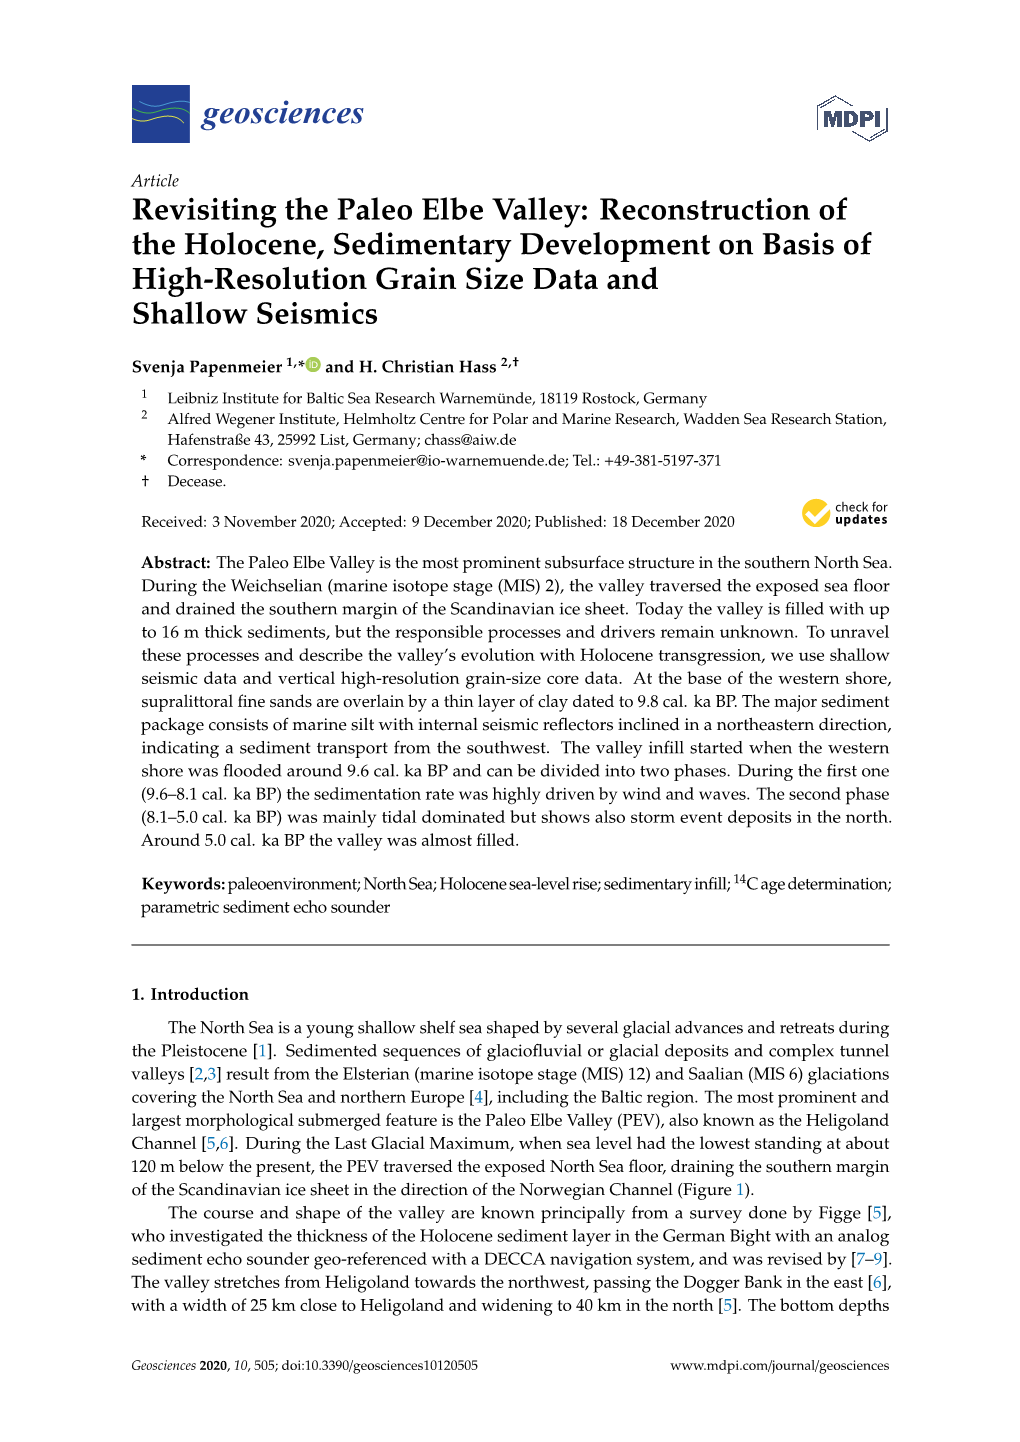 Revisiting the Paleo Elbe Valley: Reconstruction of the Holocene, Sedimentary Development on Basis of High-Resolution Grain Size Data and Shallow Seismics